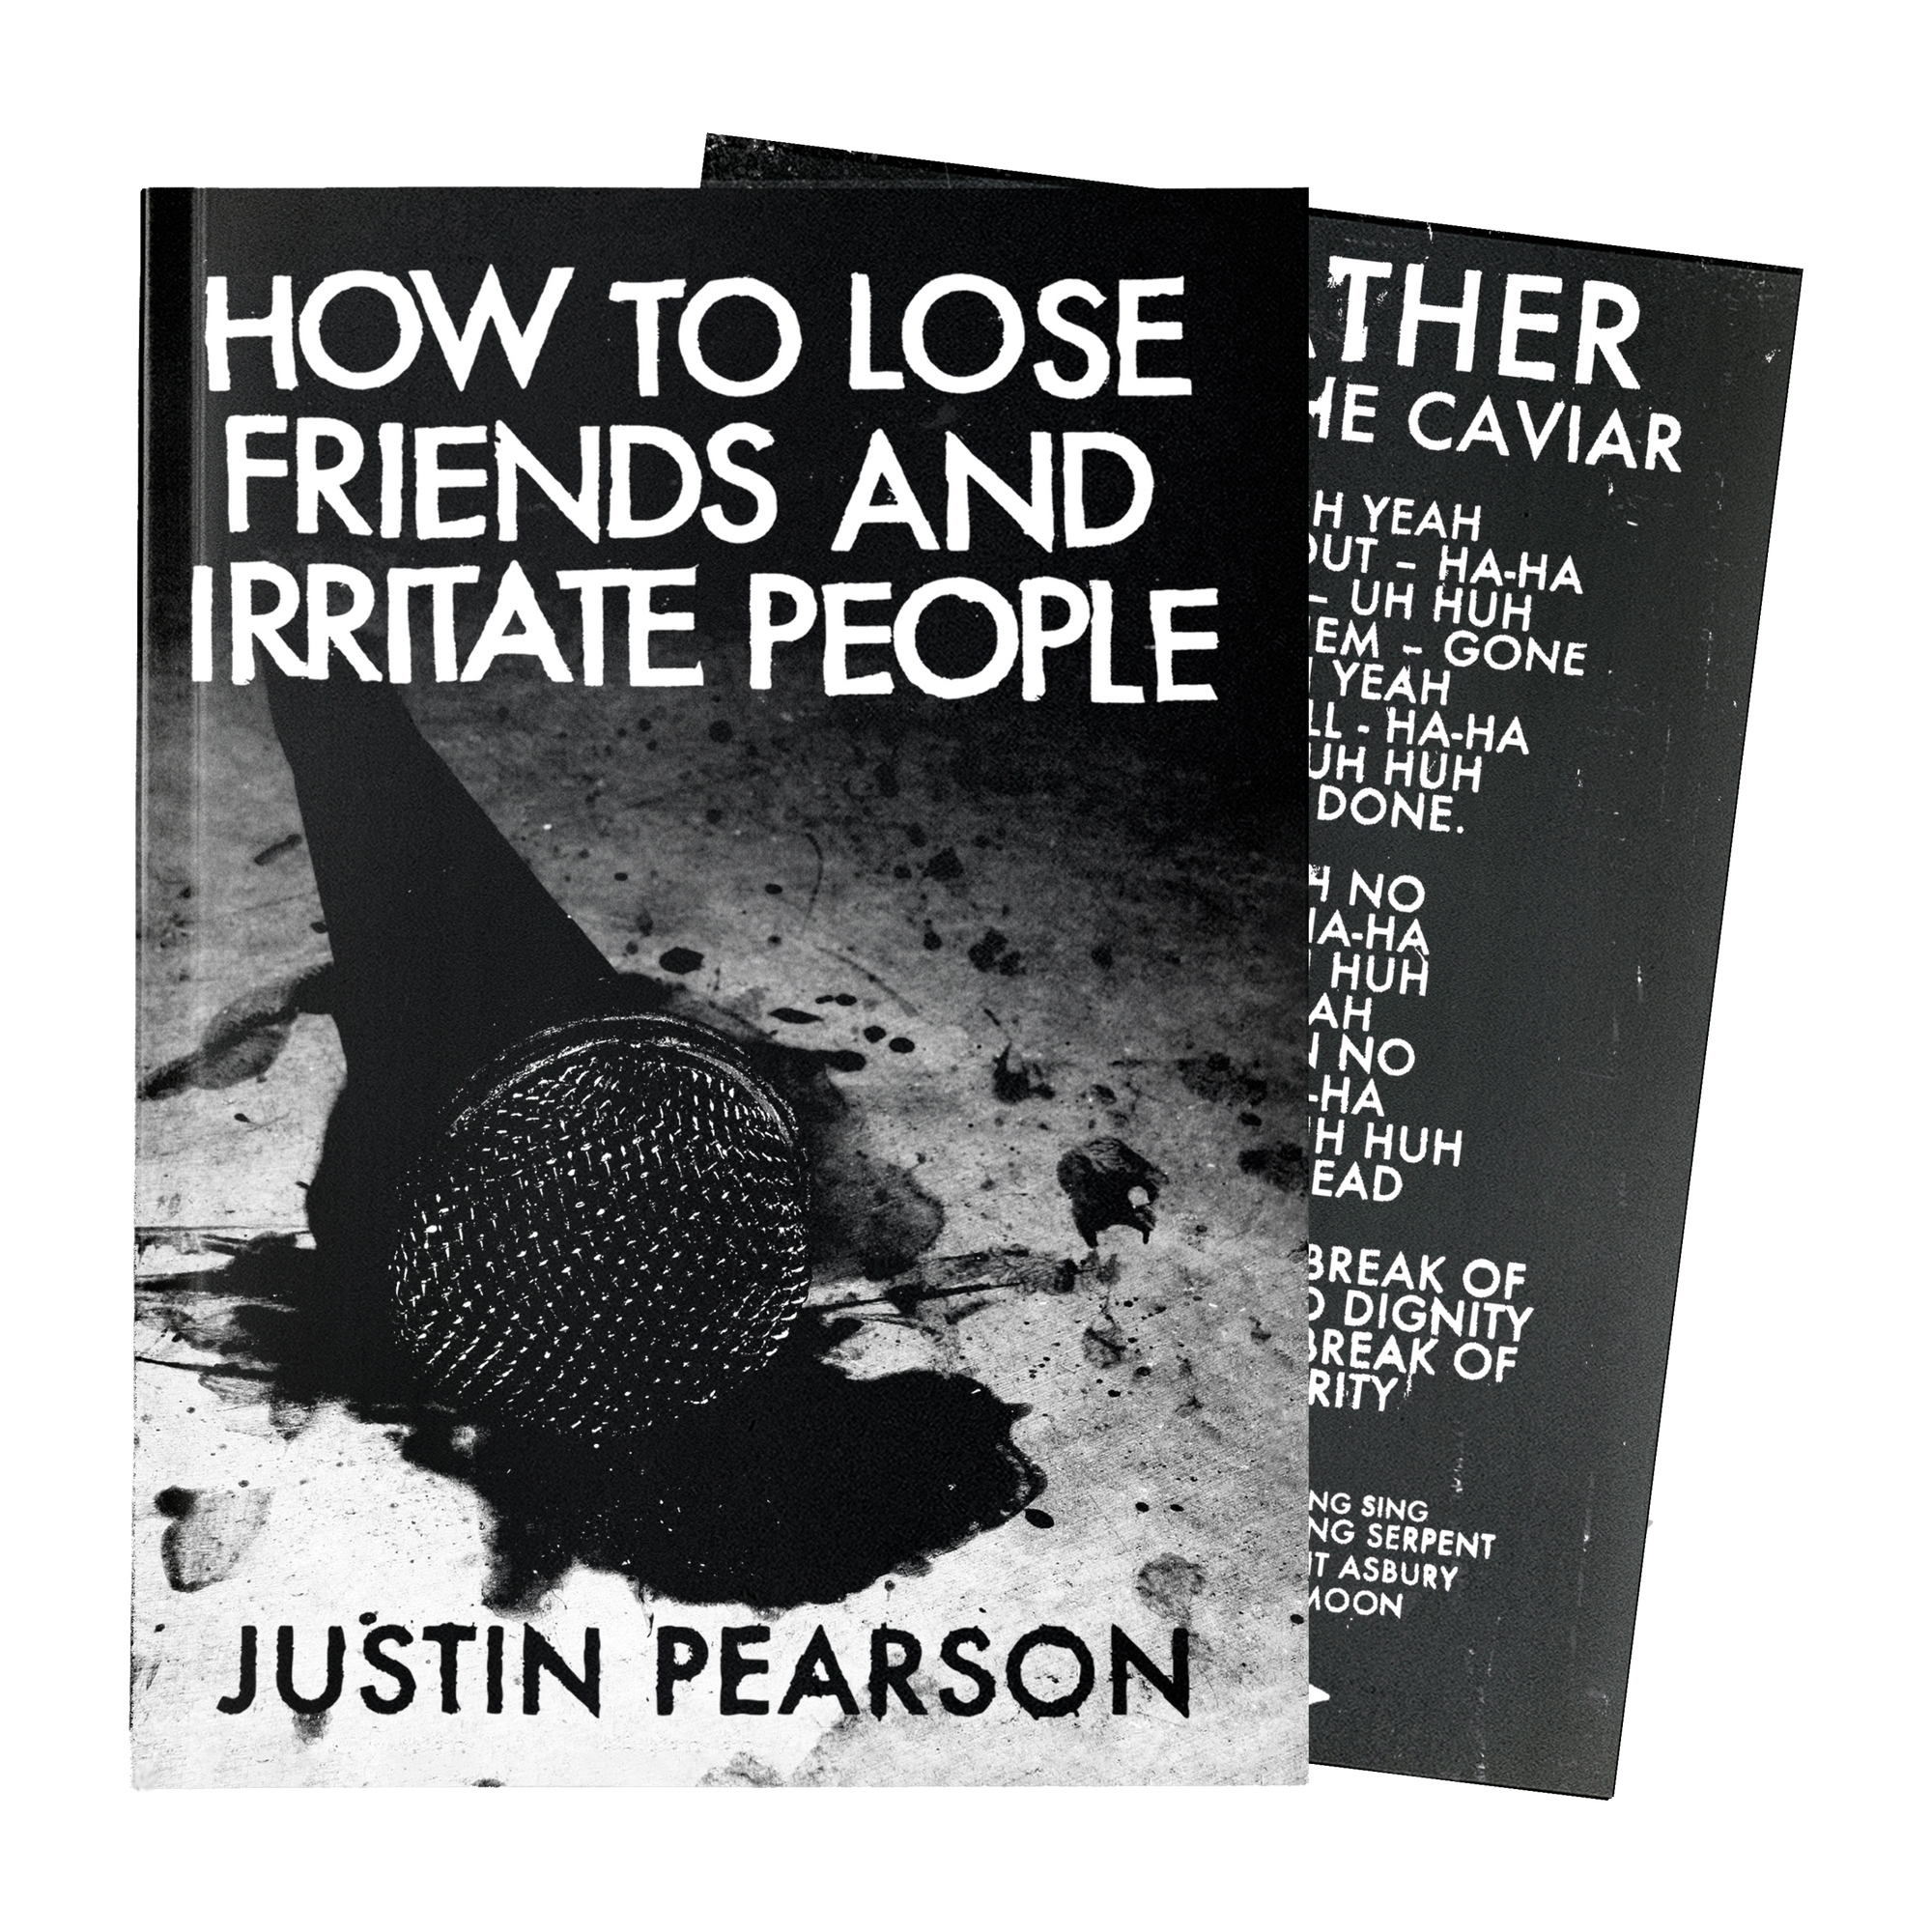 JUSTIN PEARSON "How To Lose Friends And Irritate People"